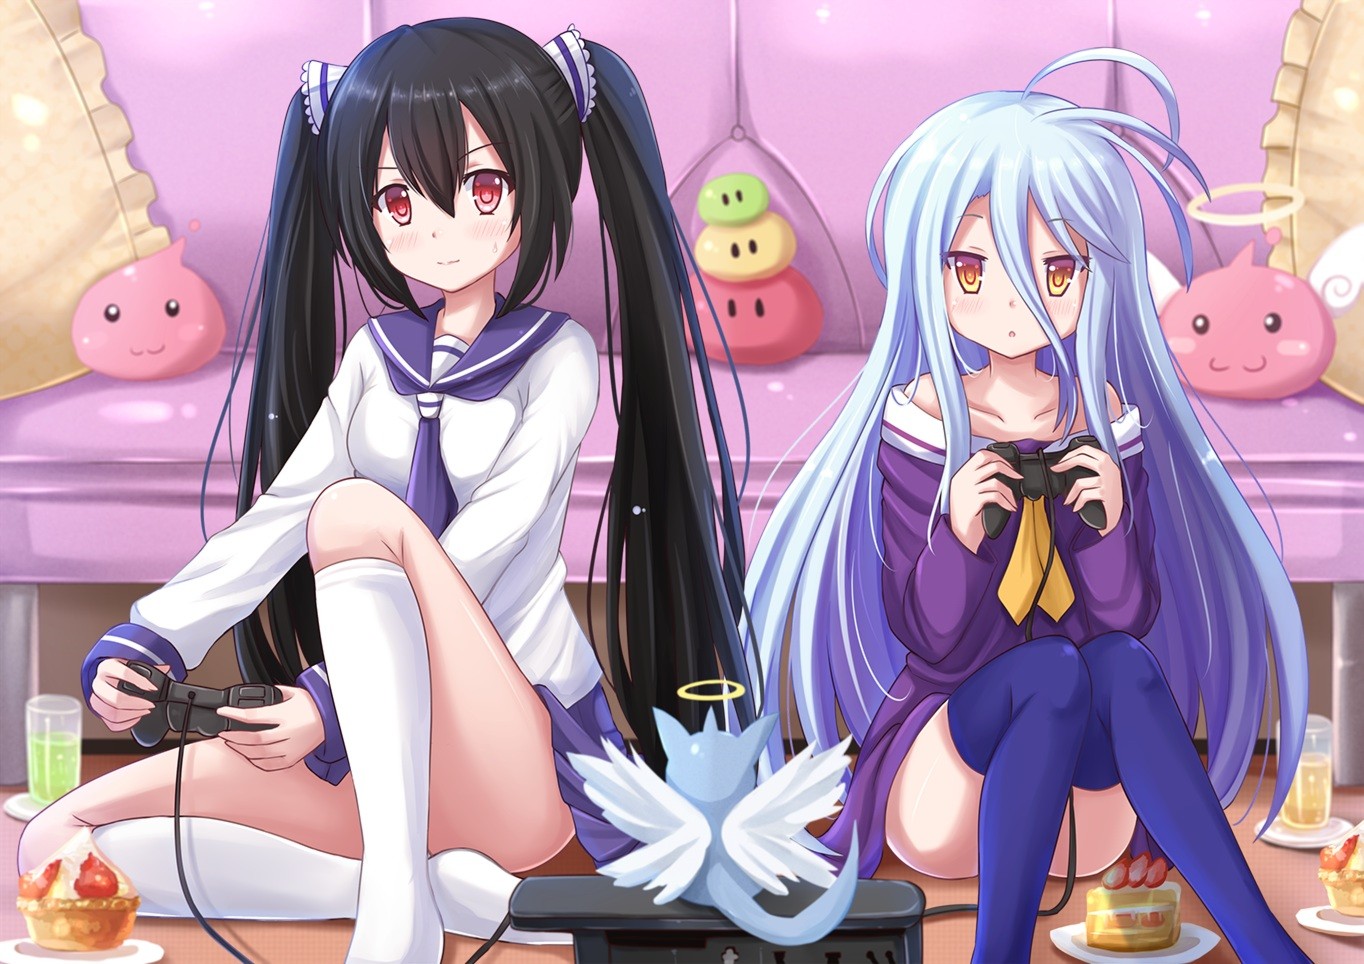 Anime 1364x964 anime anime girls No Game No Life Shiro (No Game No Life) original characters twintails school uniform video games DeviantArt controllers gamer knees together long hair tie black hair blue hair stockings socks